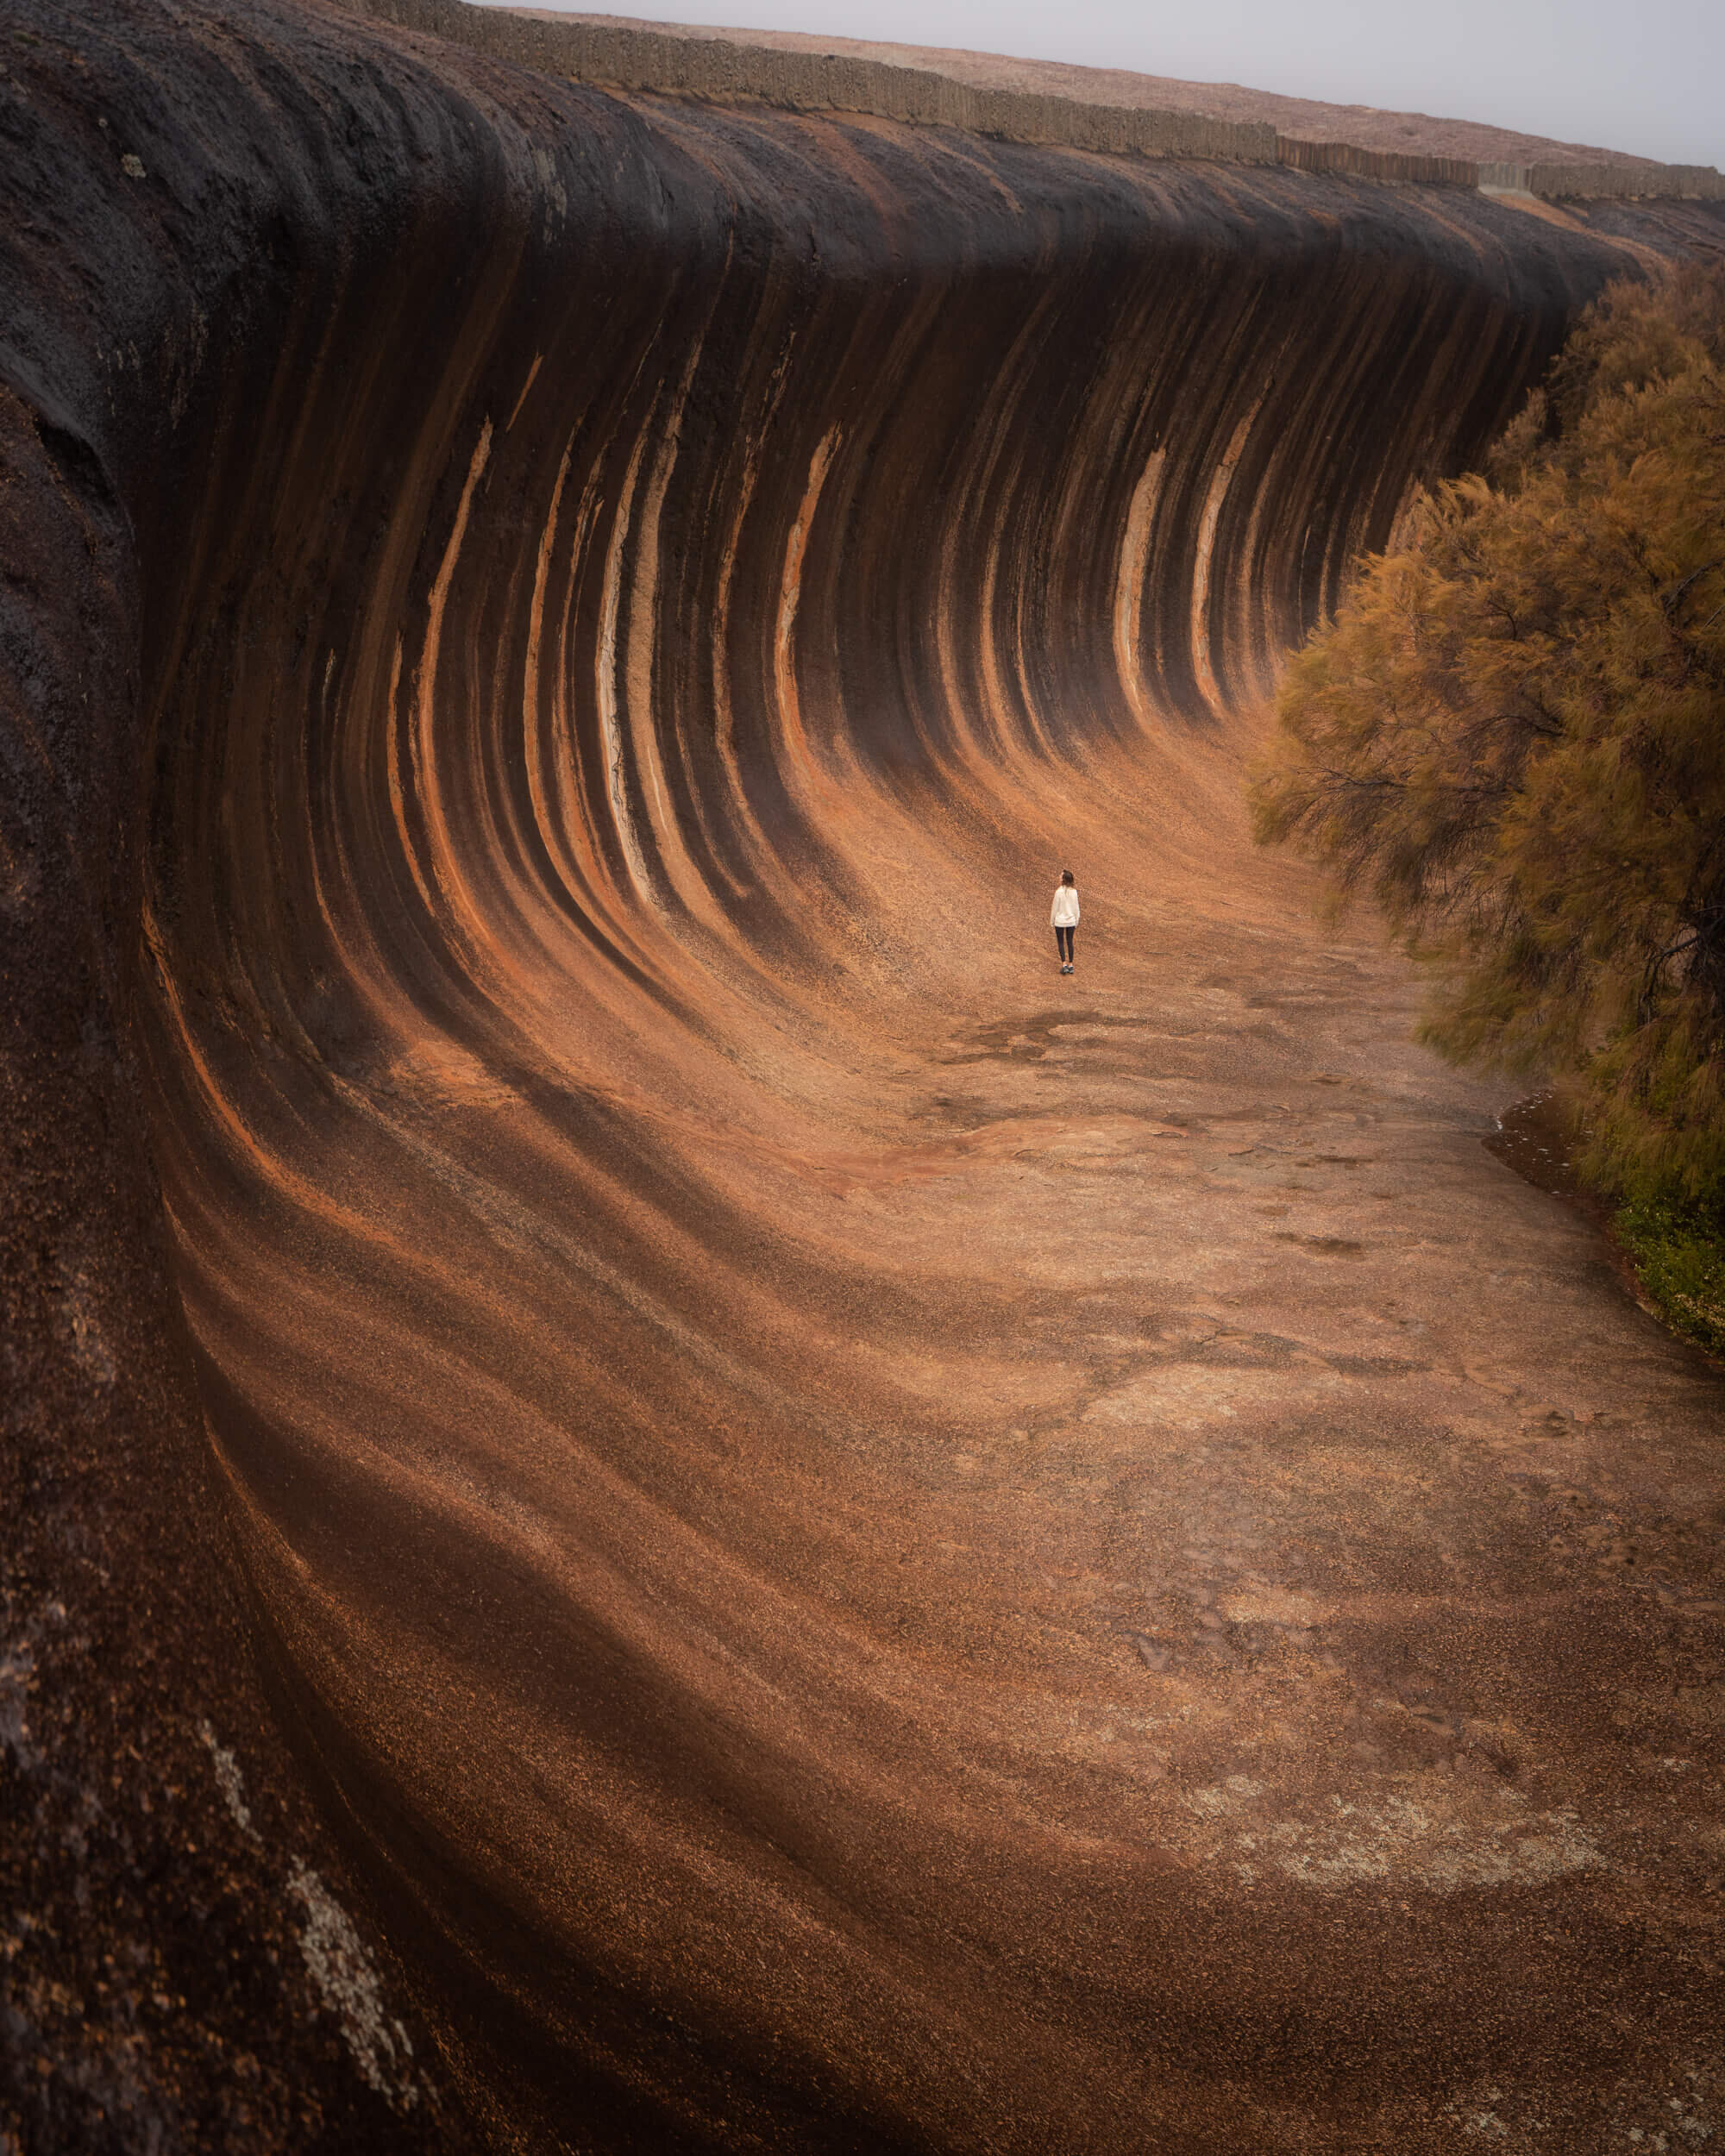 The Wave in Australia’s outback.